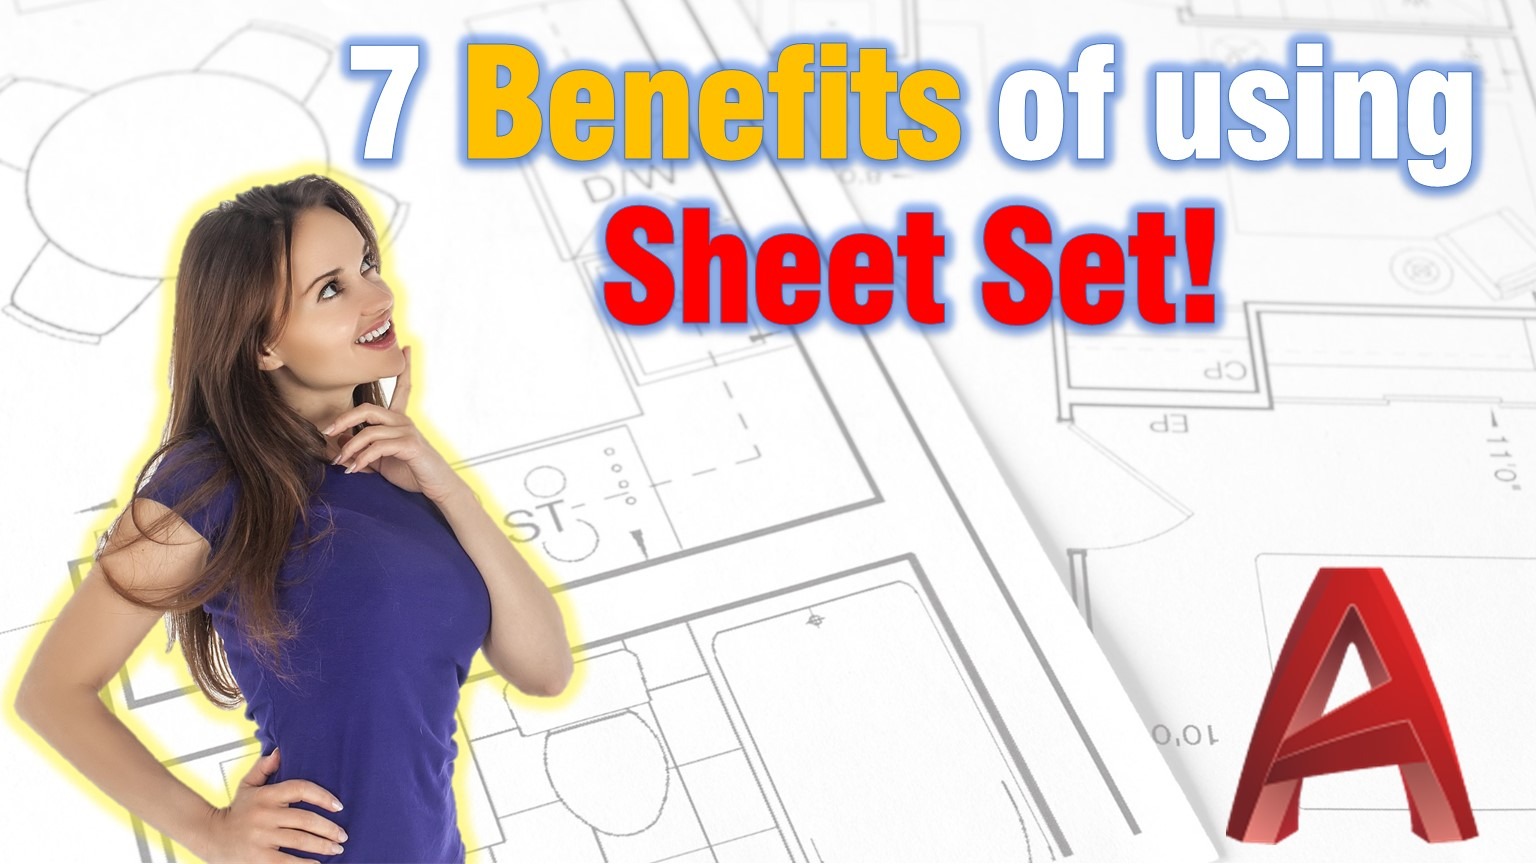 Learn all the benefits of using Sheet Set